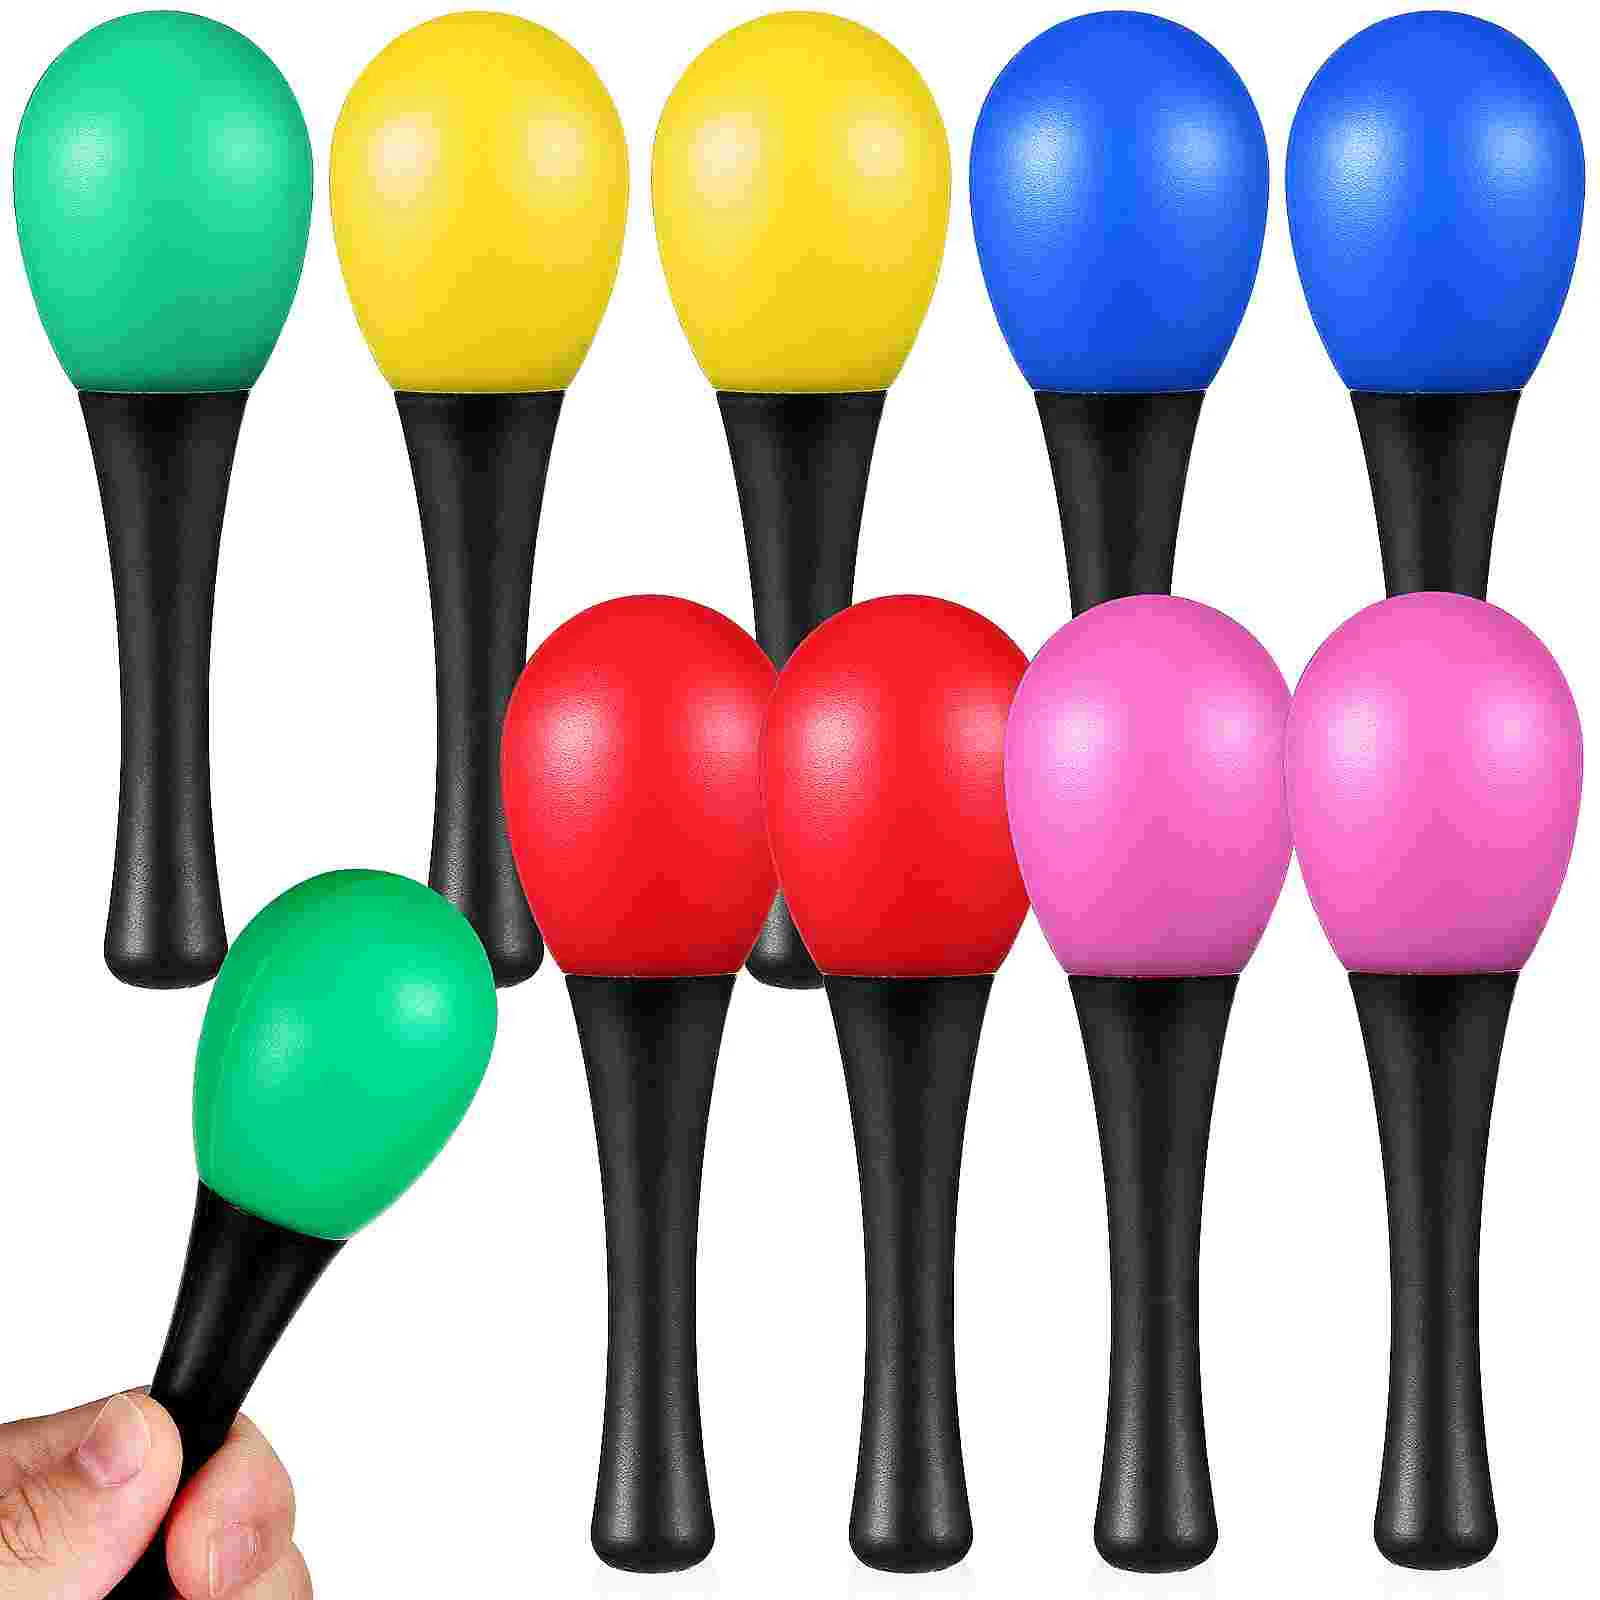 

10 Pcs Small Maraca Toy Percussion Instruments Maracas Musical Plastic Shaking Hammer Training Sand Mexican Party Favors